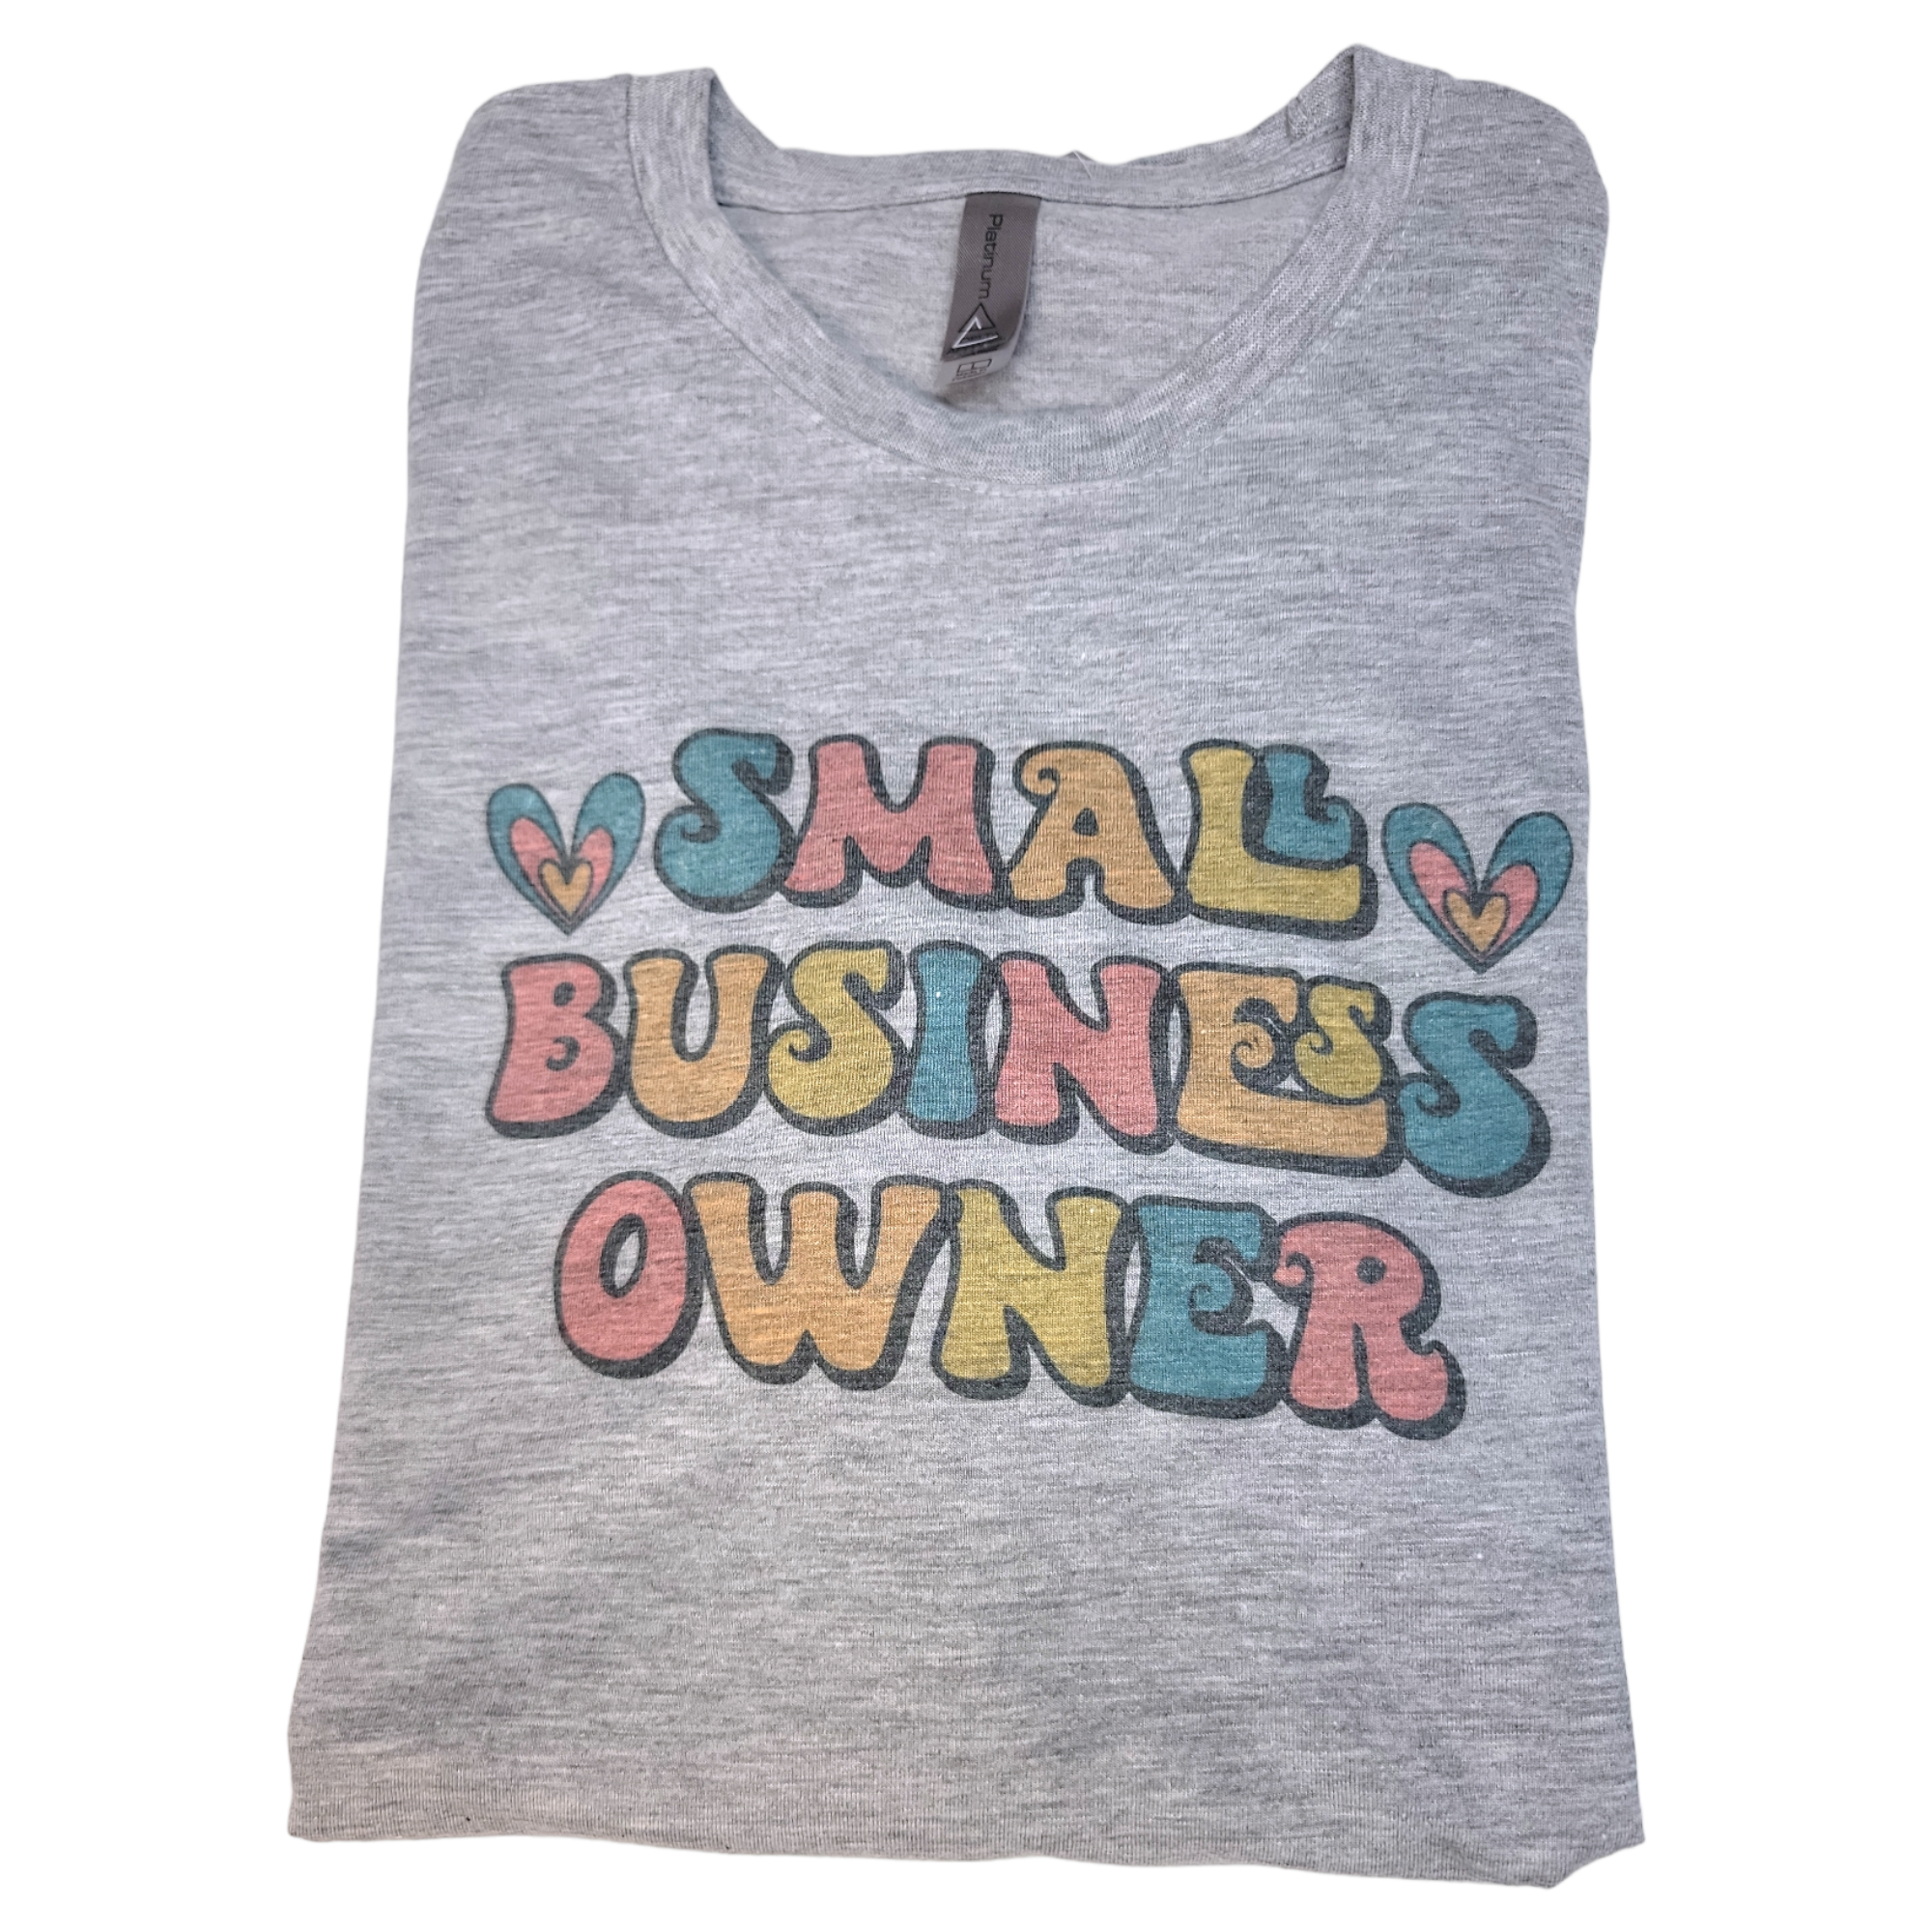 "Small Business Owner" Short sleeve T-shirt Unisex - Travelers Trade Post